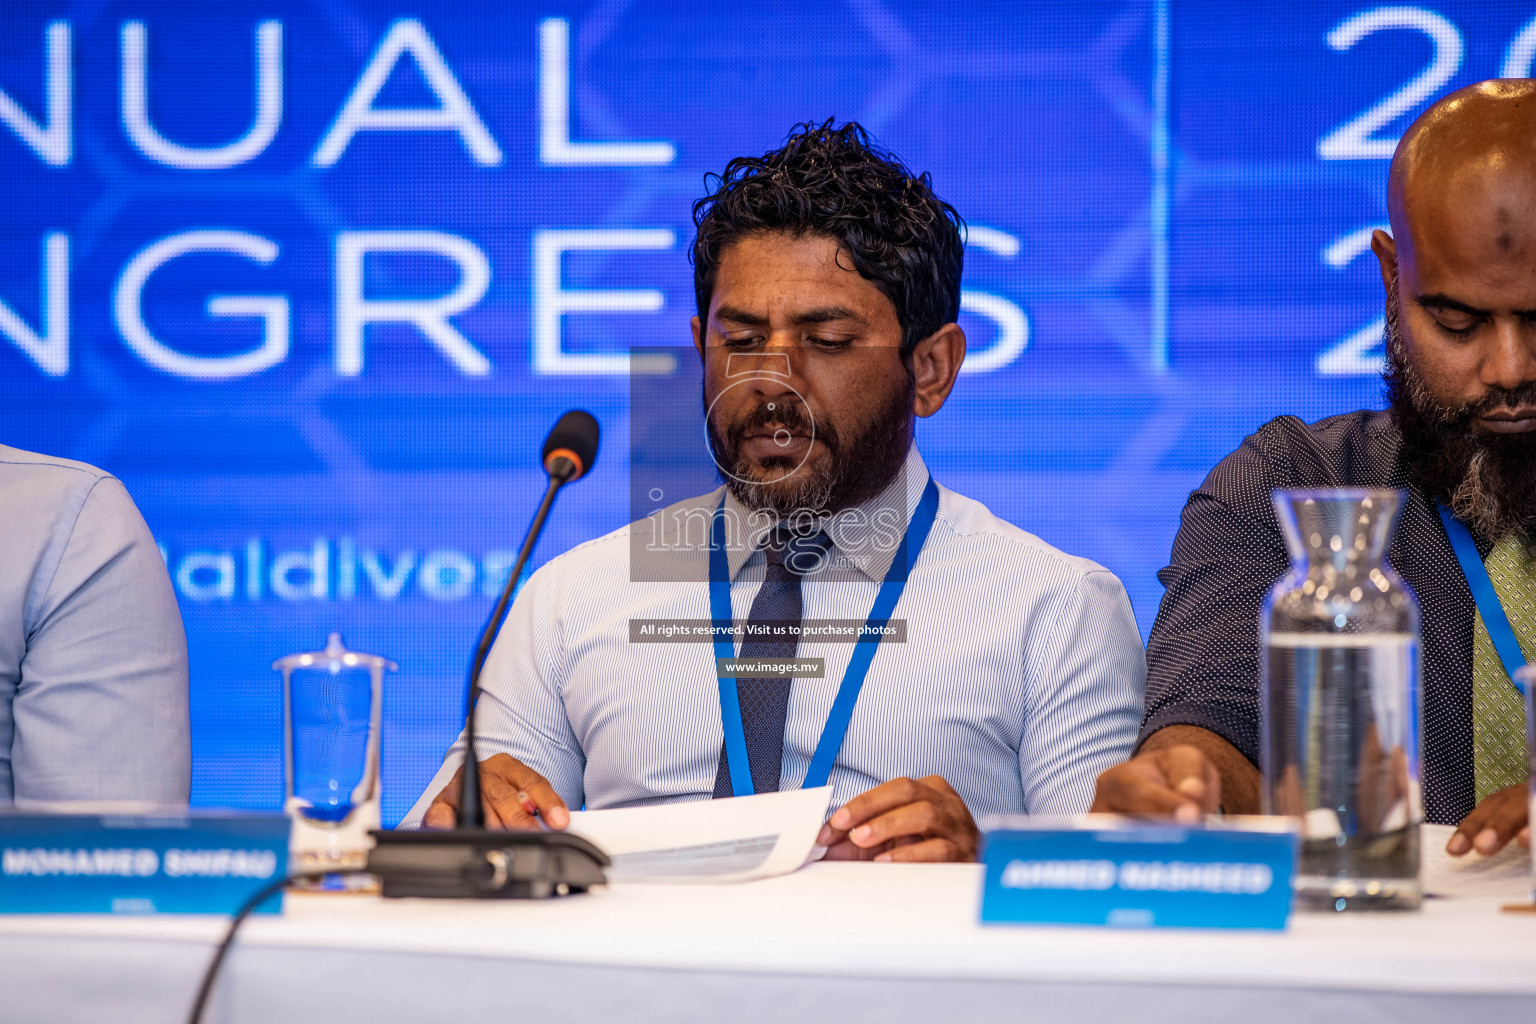 Football Association of Maldives Annual Congress held in Male', Maldives on 6th June 2022. Photos By: Nausham waheed /images.mv